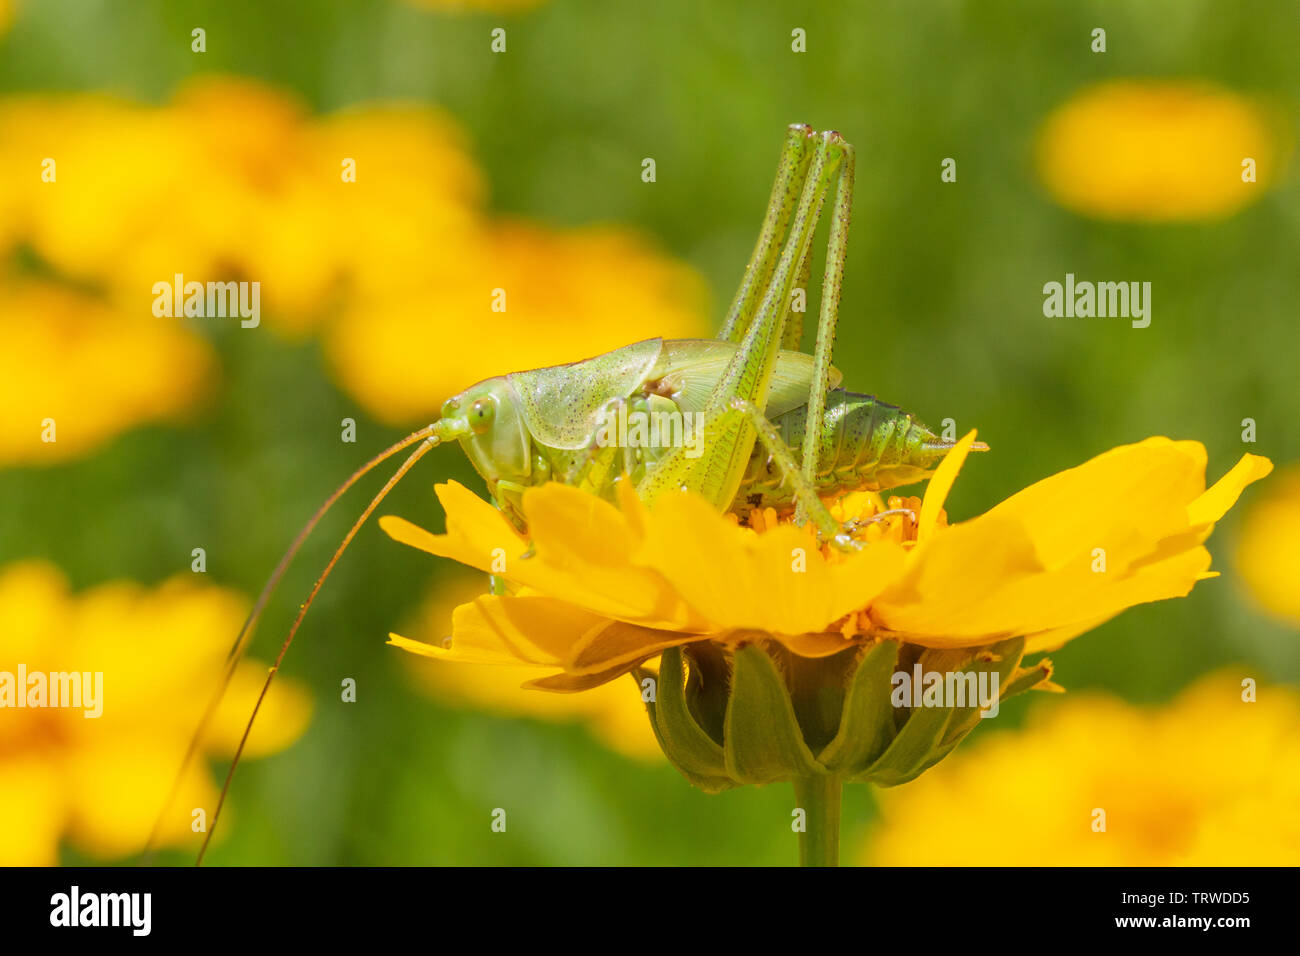 close up of green grasshopper sitting on yellow flower Stock Photo